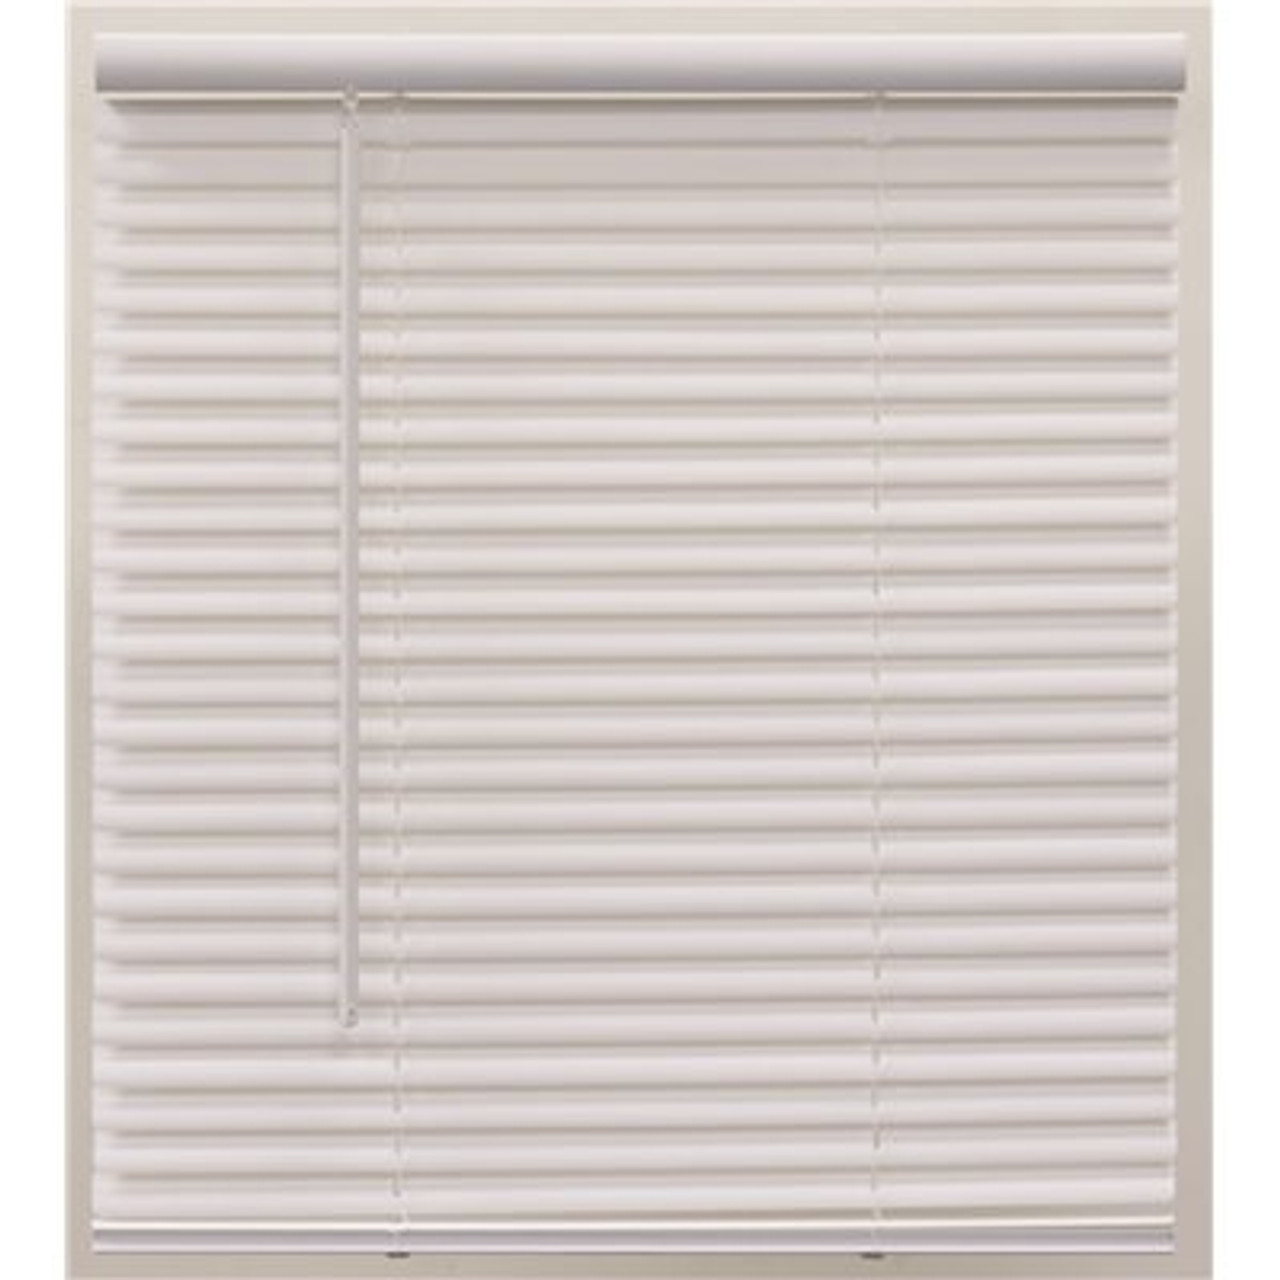 Champion Pre-Cut 55 in. W x 48 in. L White Cordless Light Filtering Vinyl Mini Blind with 1 in. Slats